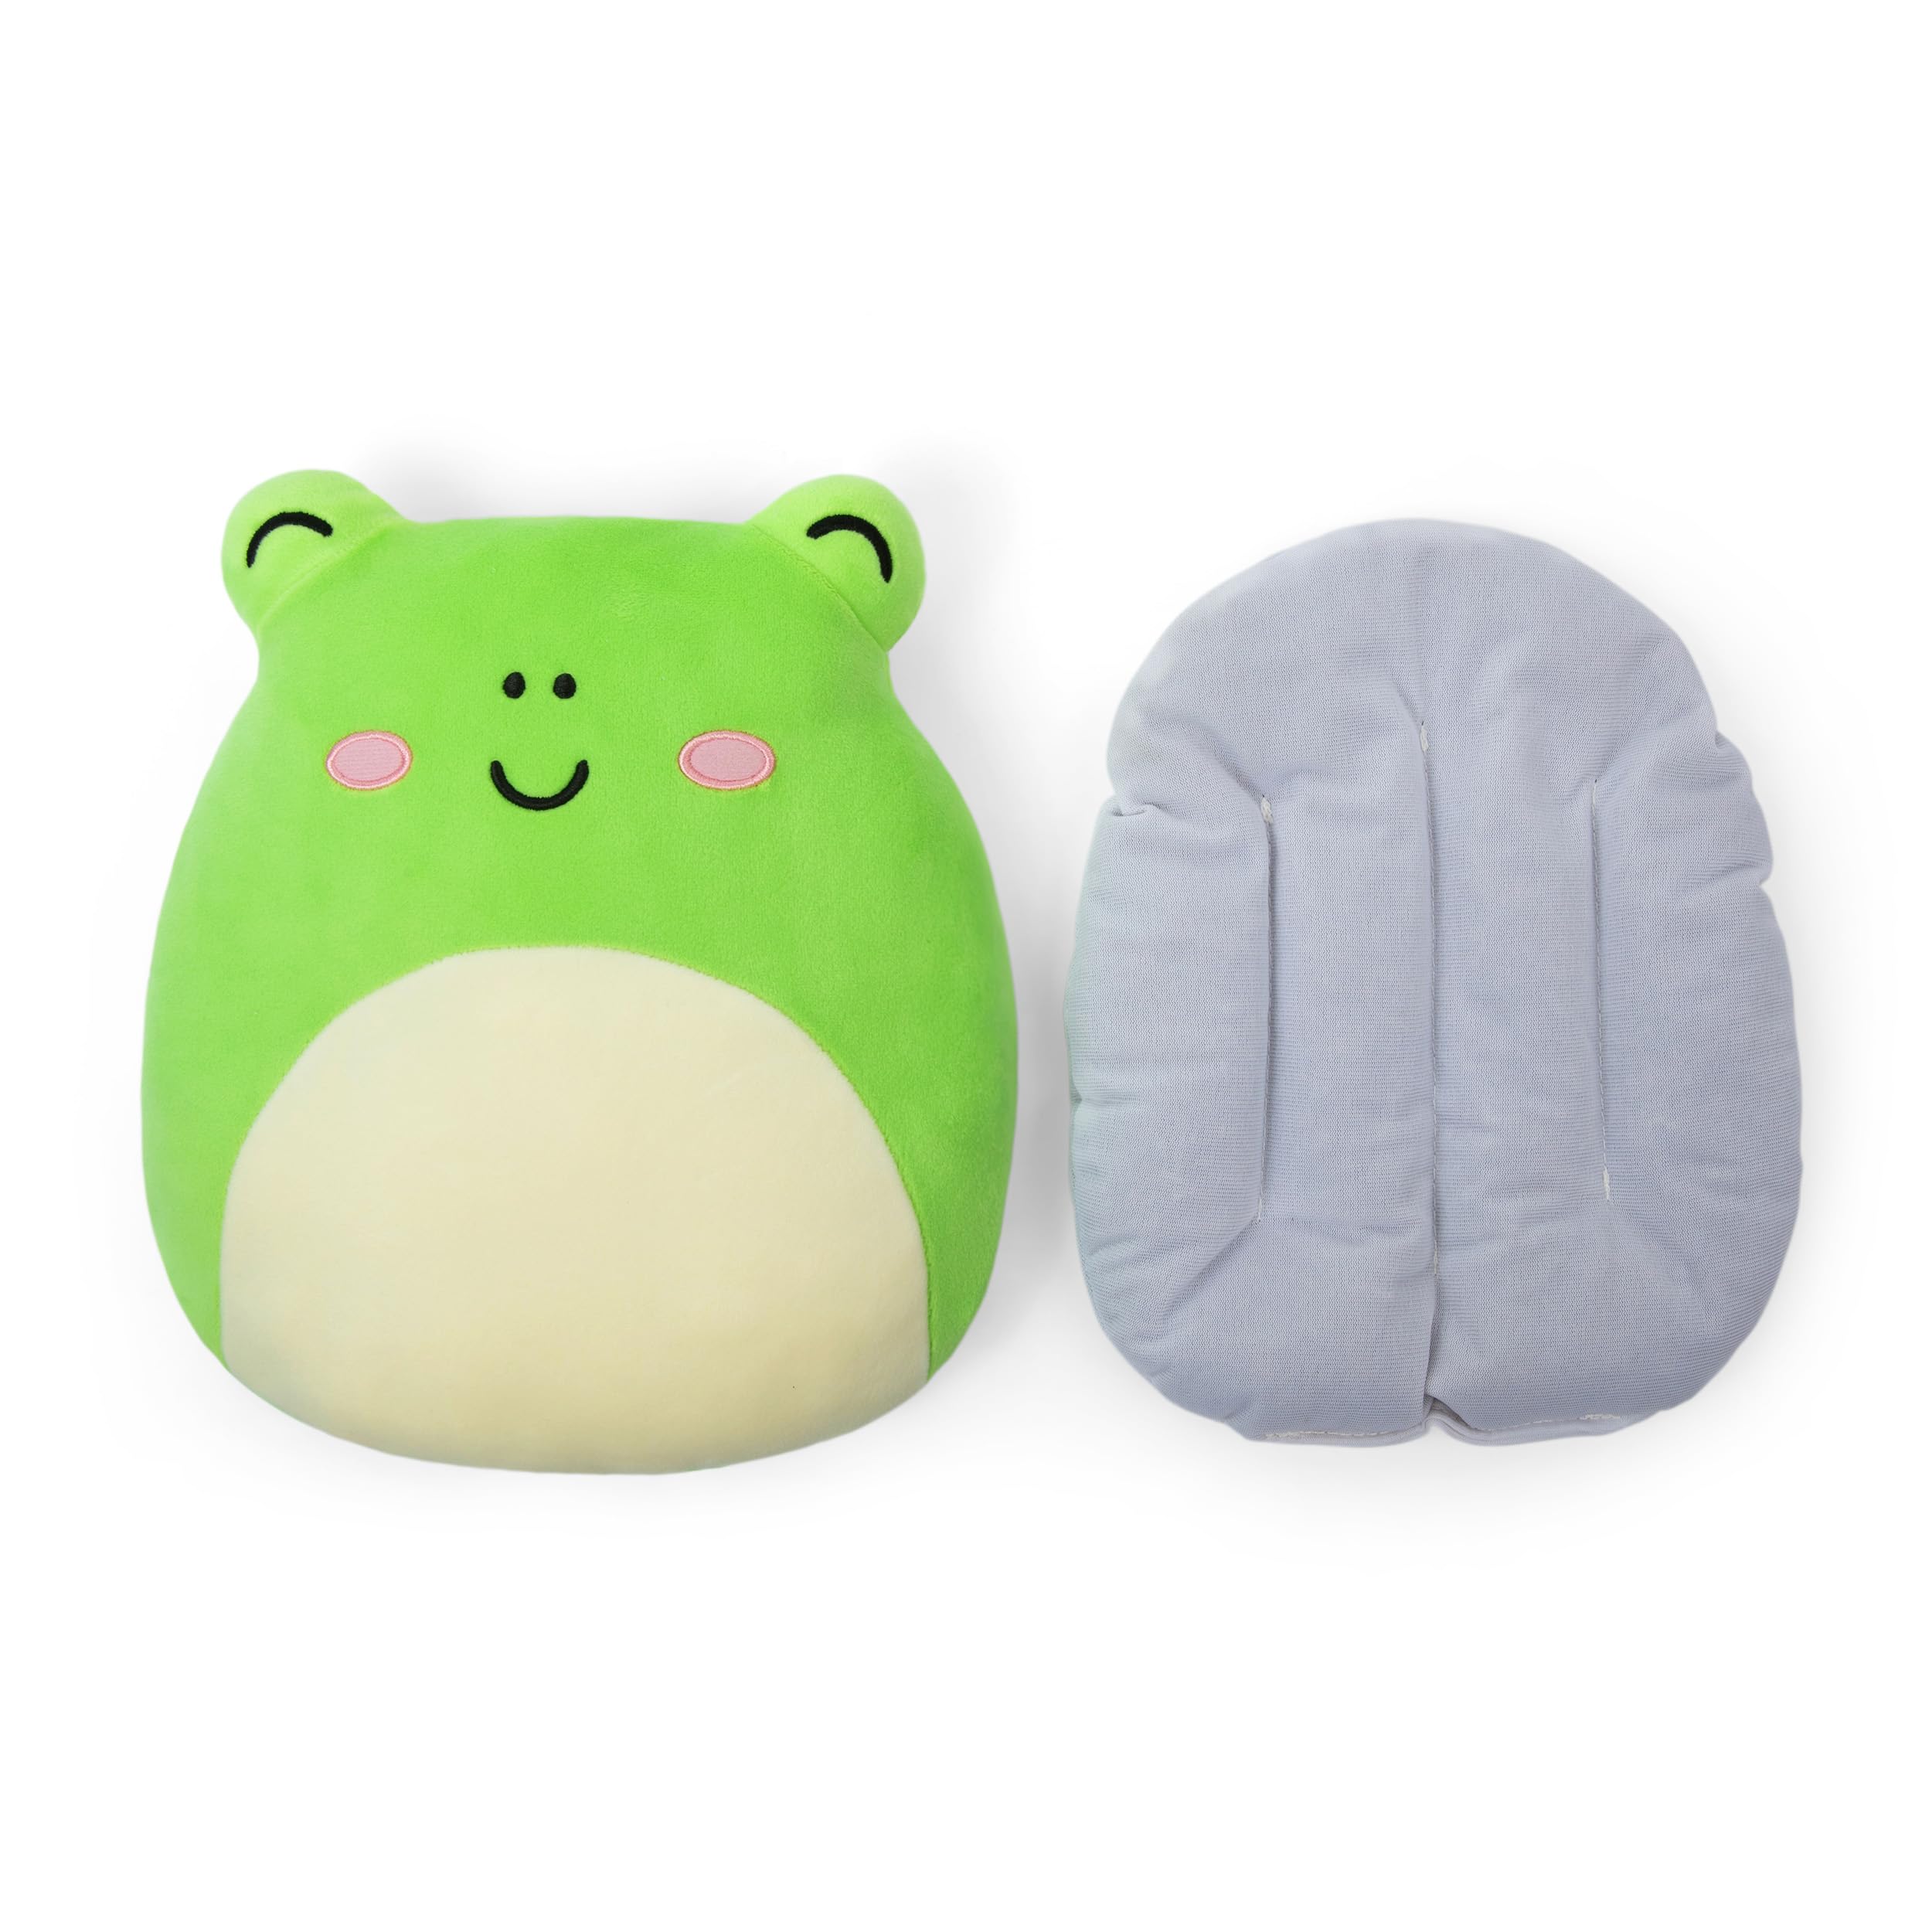 Squishmallows Wendy Heating Pad - Squishmallows Heating Pads for Cramps by Relatable